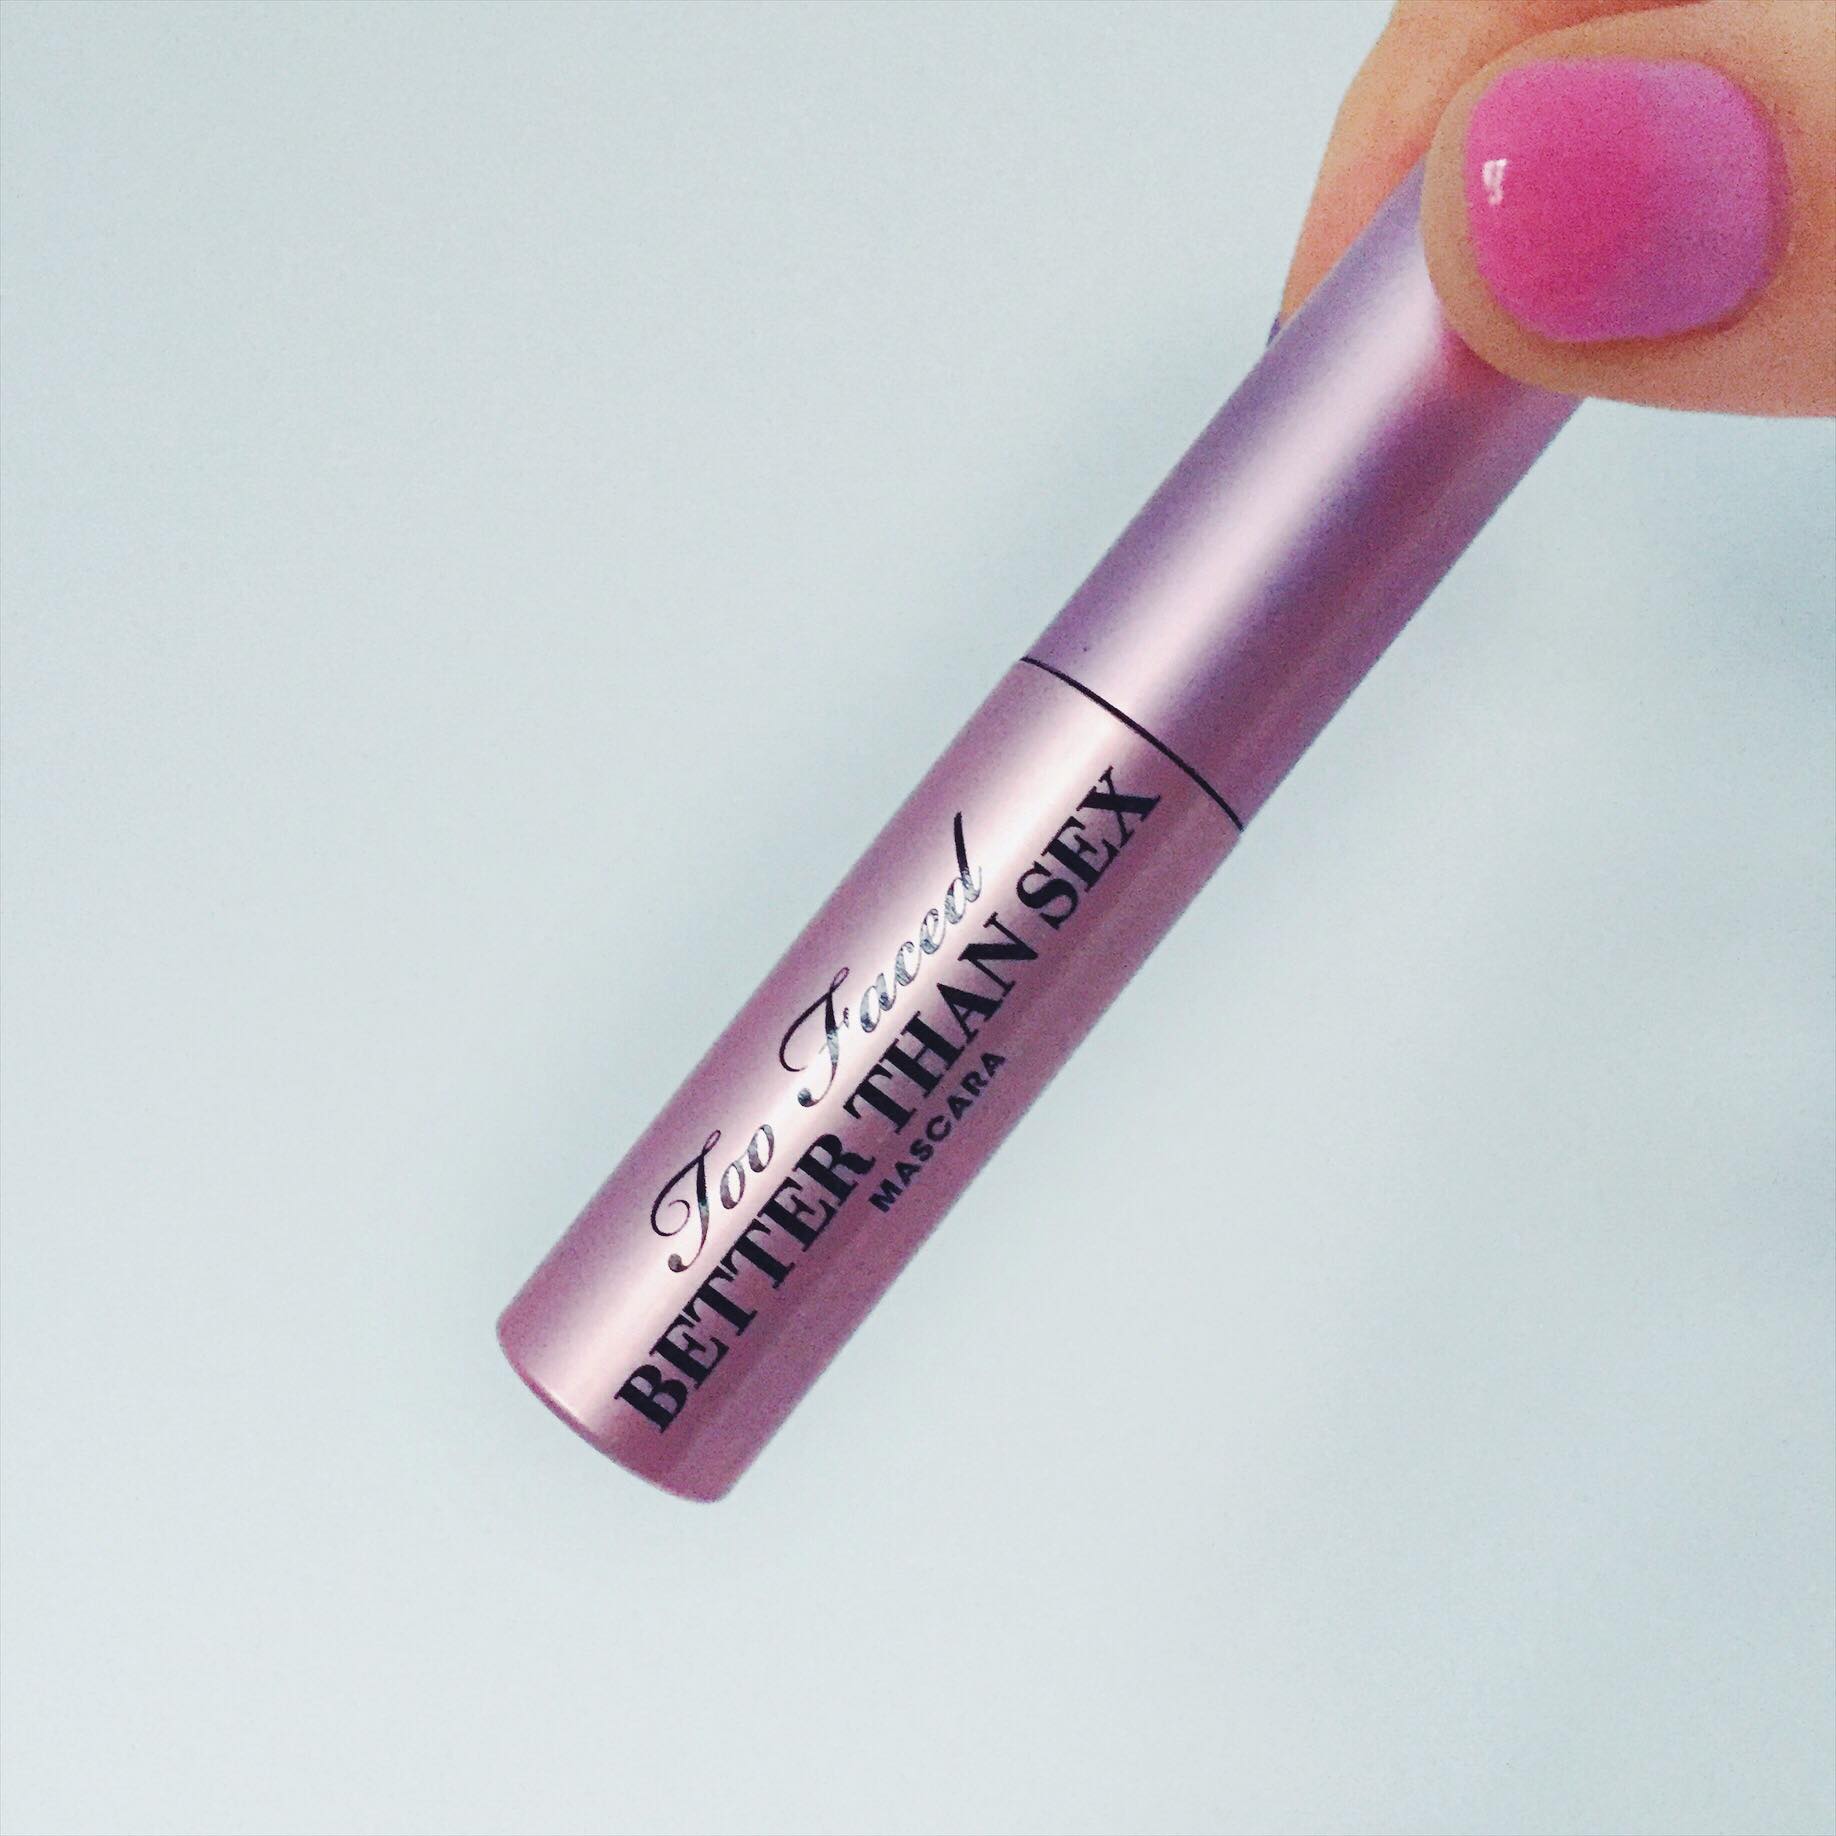 too-faced-mascara-better-than-sex-review